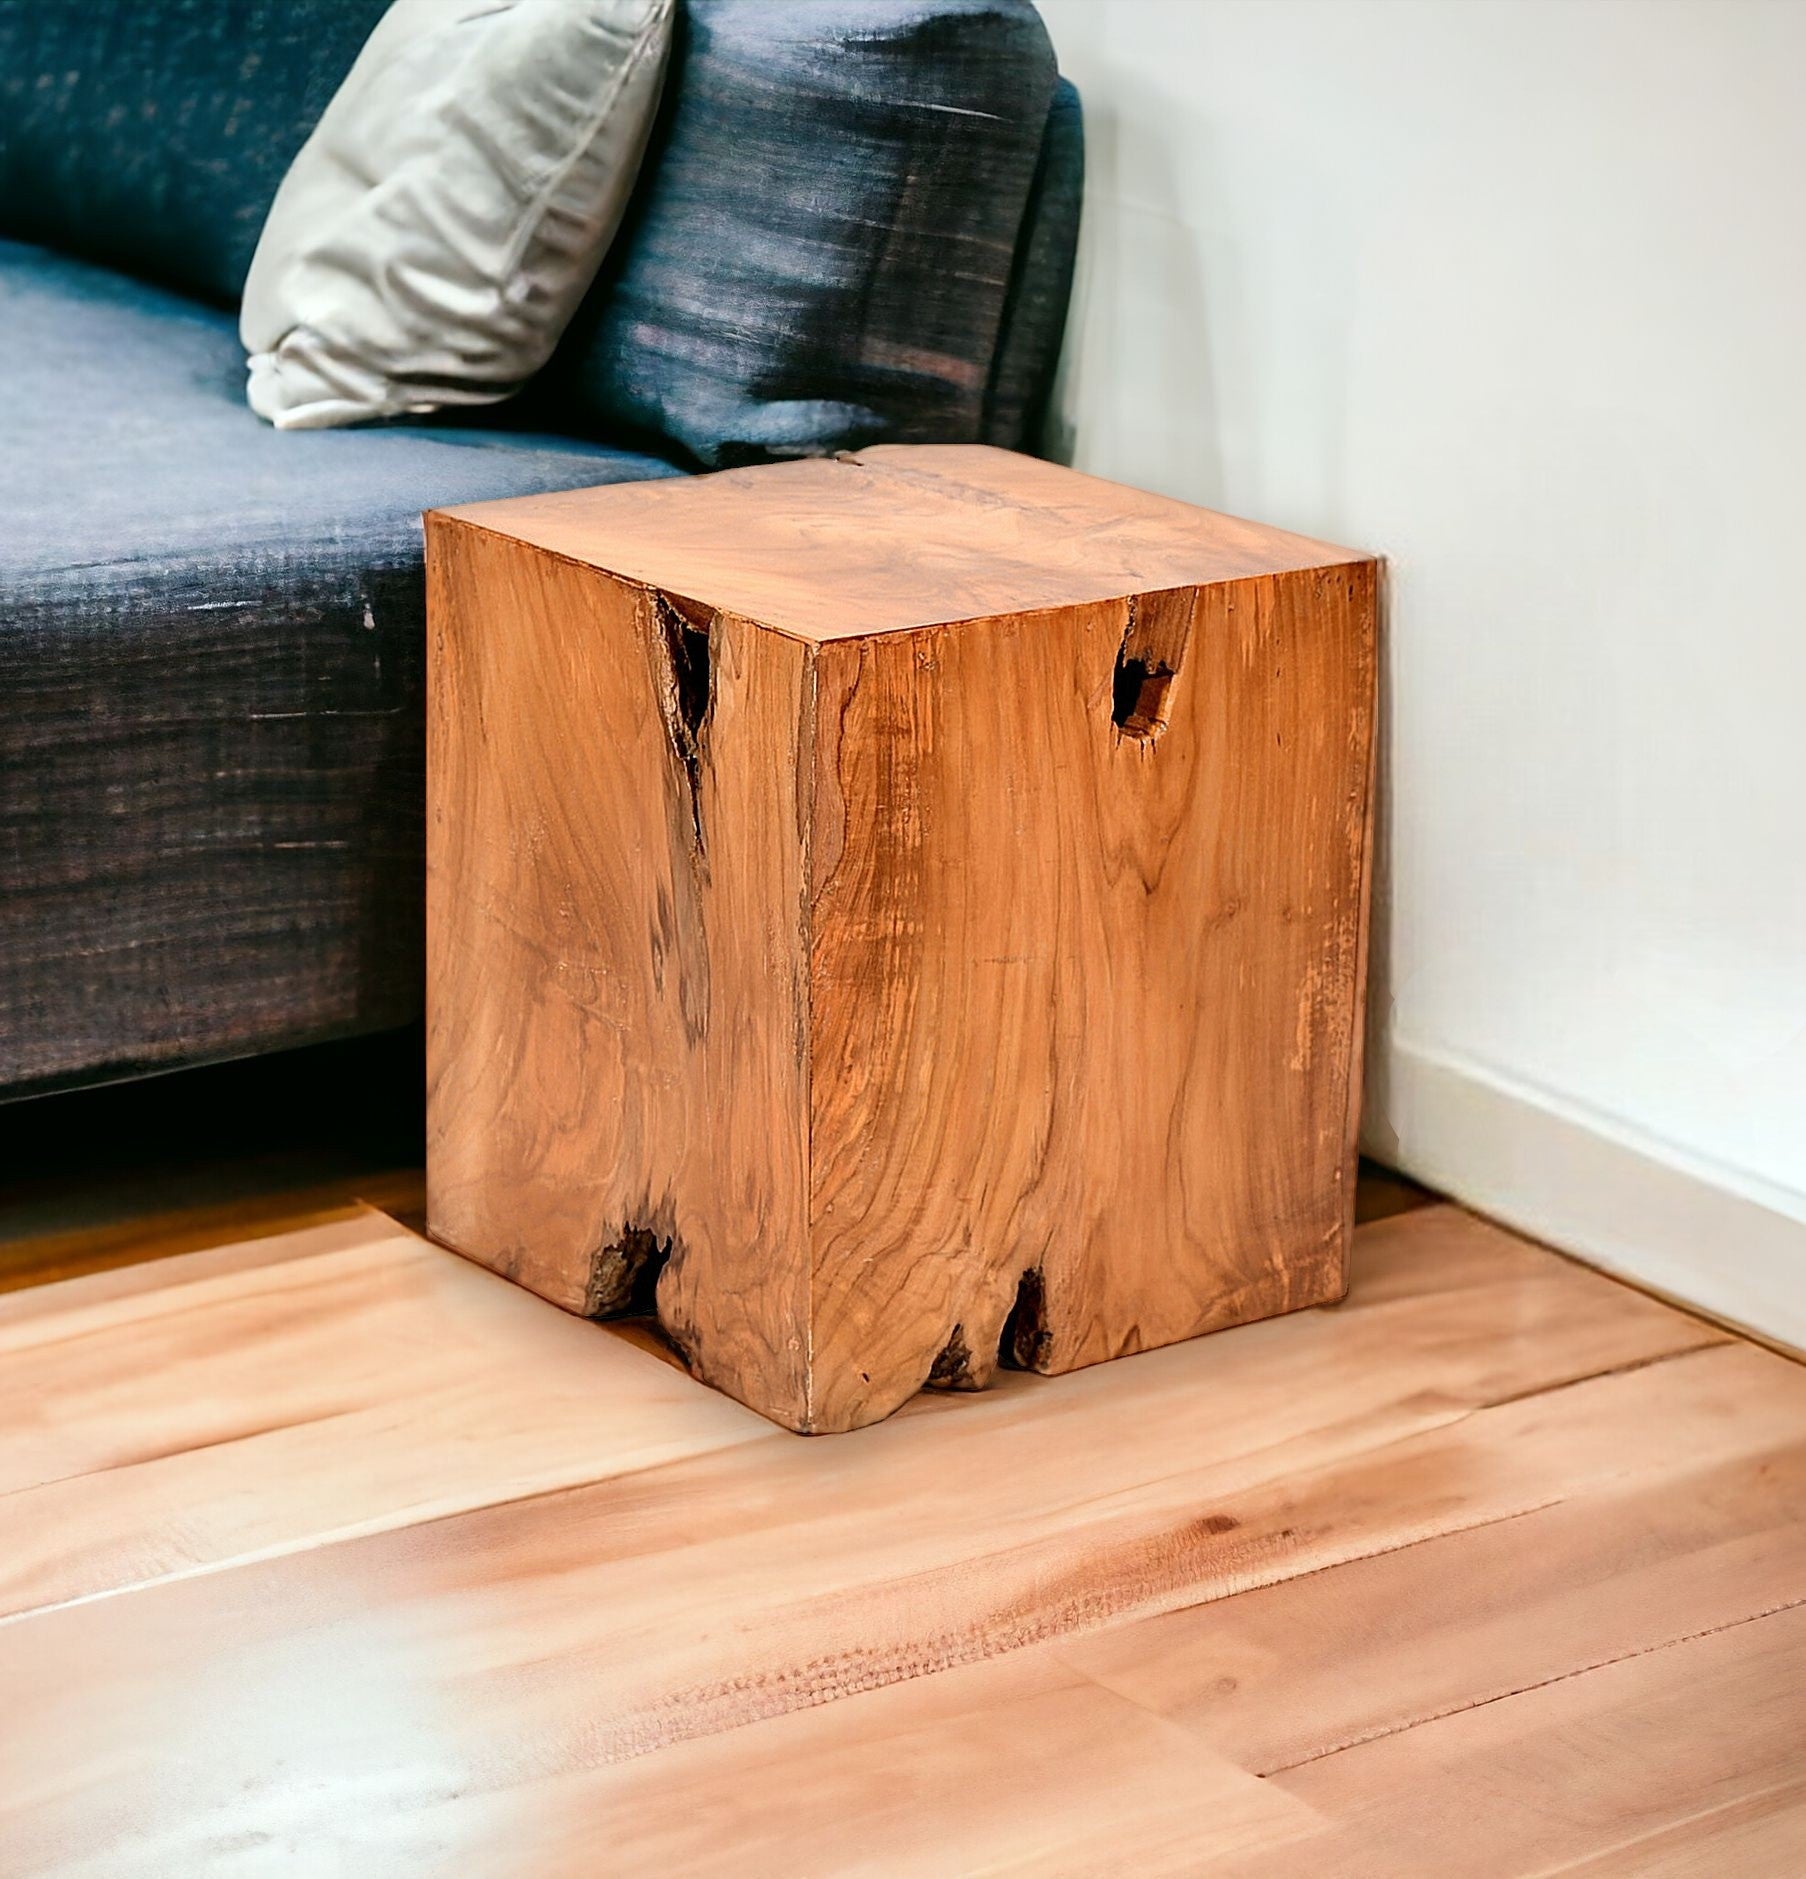 16" Natural Solid Wood End Table